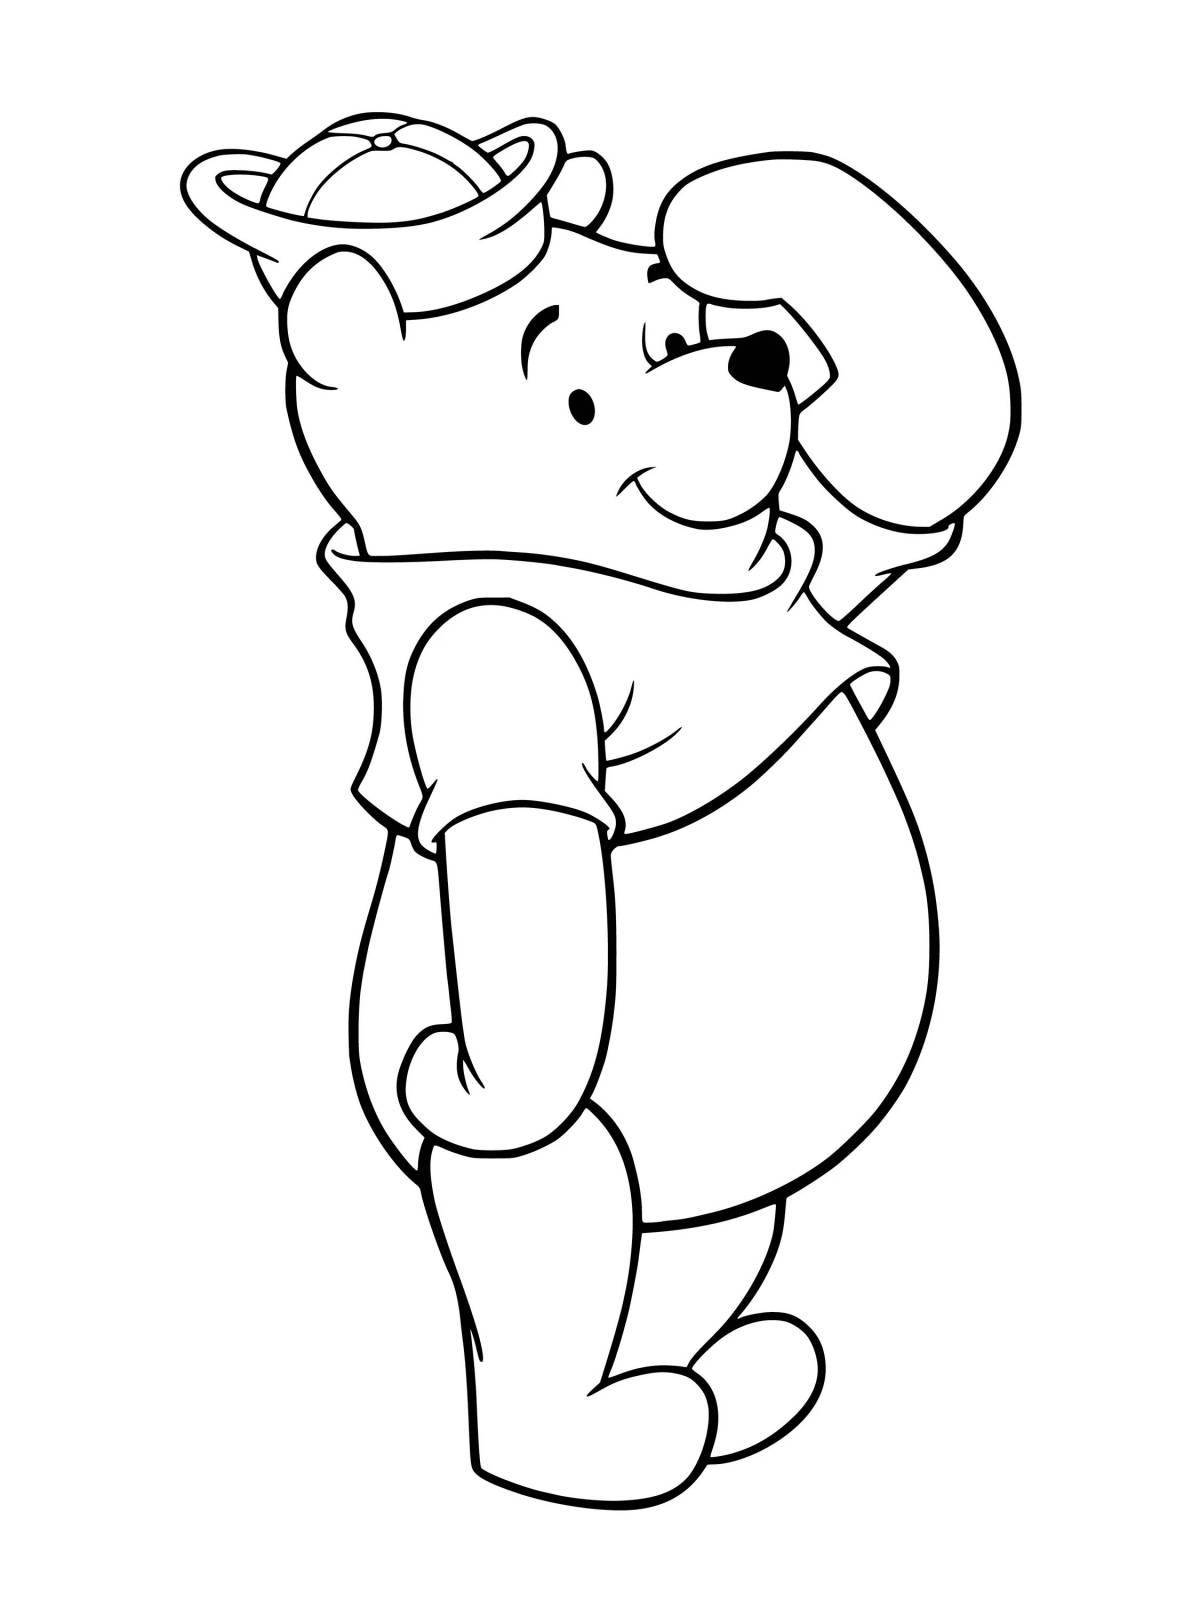 Vinnie colorful coloring page